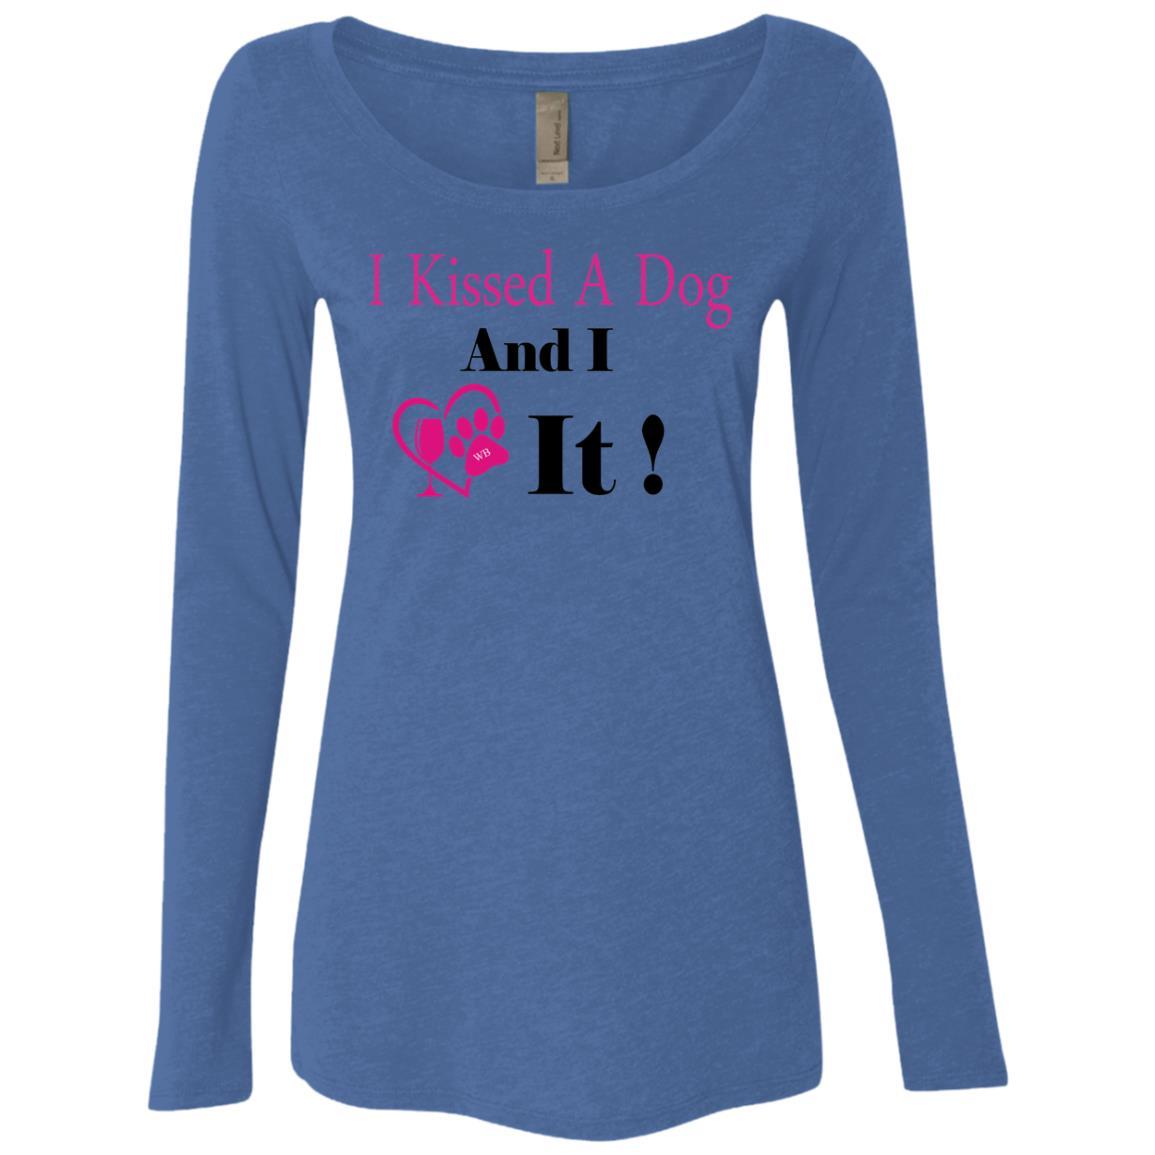 T-Shirts Vintage Royal / S WineyBitches.co "I Kissed A Dog And I Loved It:" Ladies' Triblend LS Scoop WineyBitchesCo